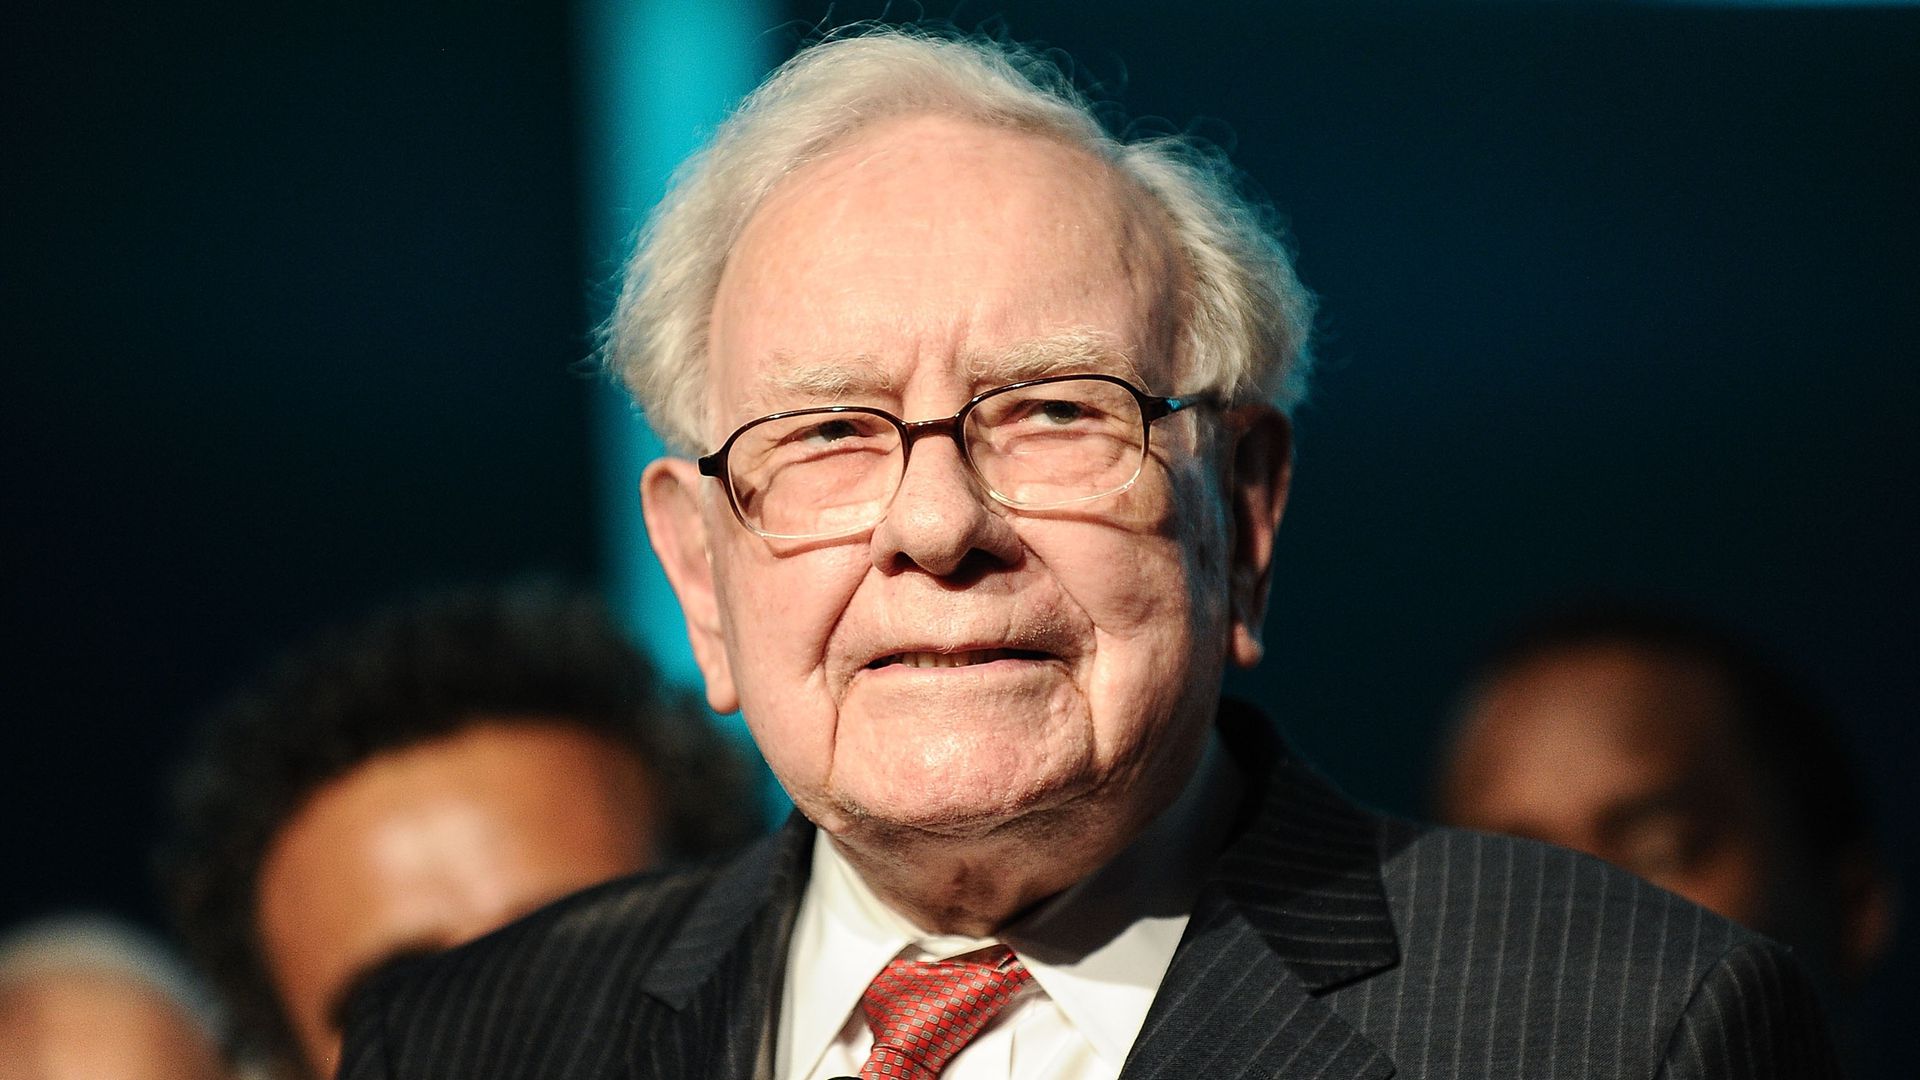 Even when Warren Buffett is no longer in charge, Abel will finally assume the role of CEO of Berkshire Hathaway